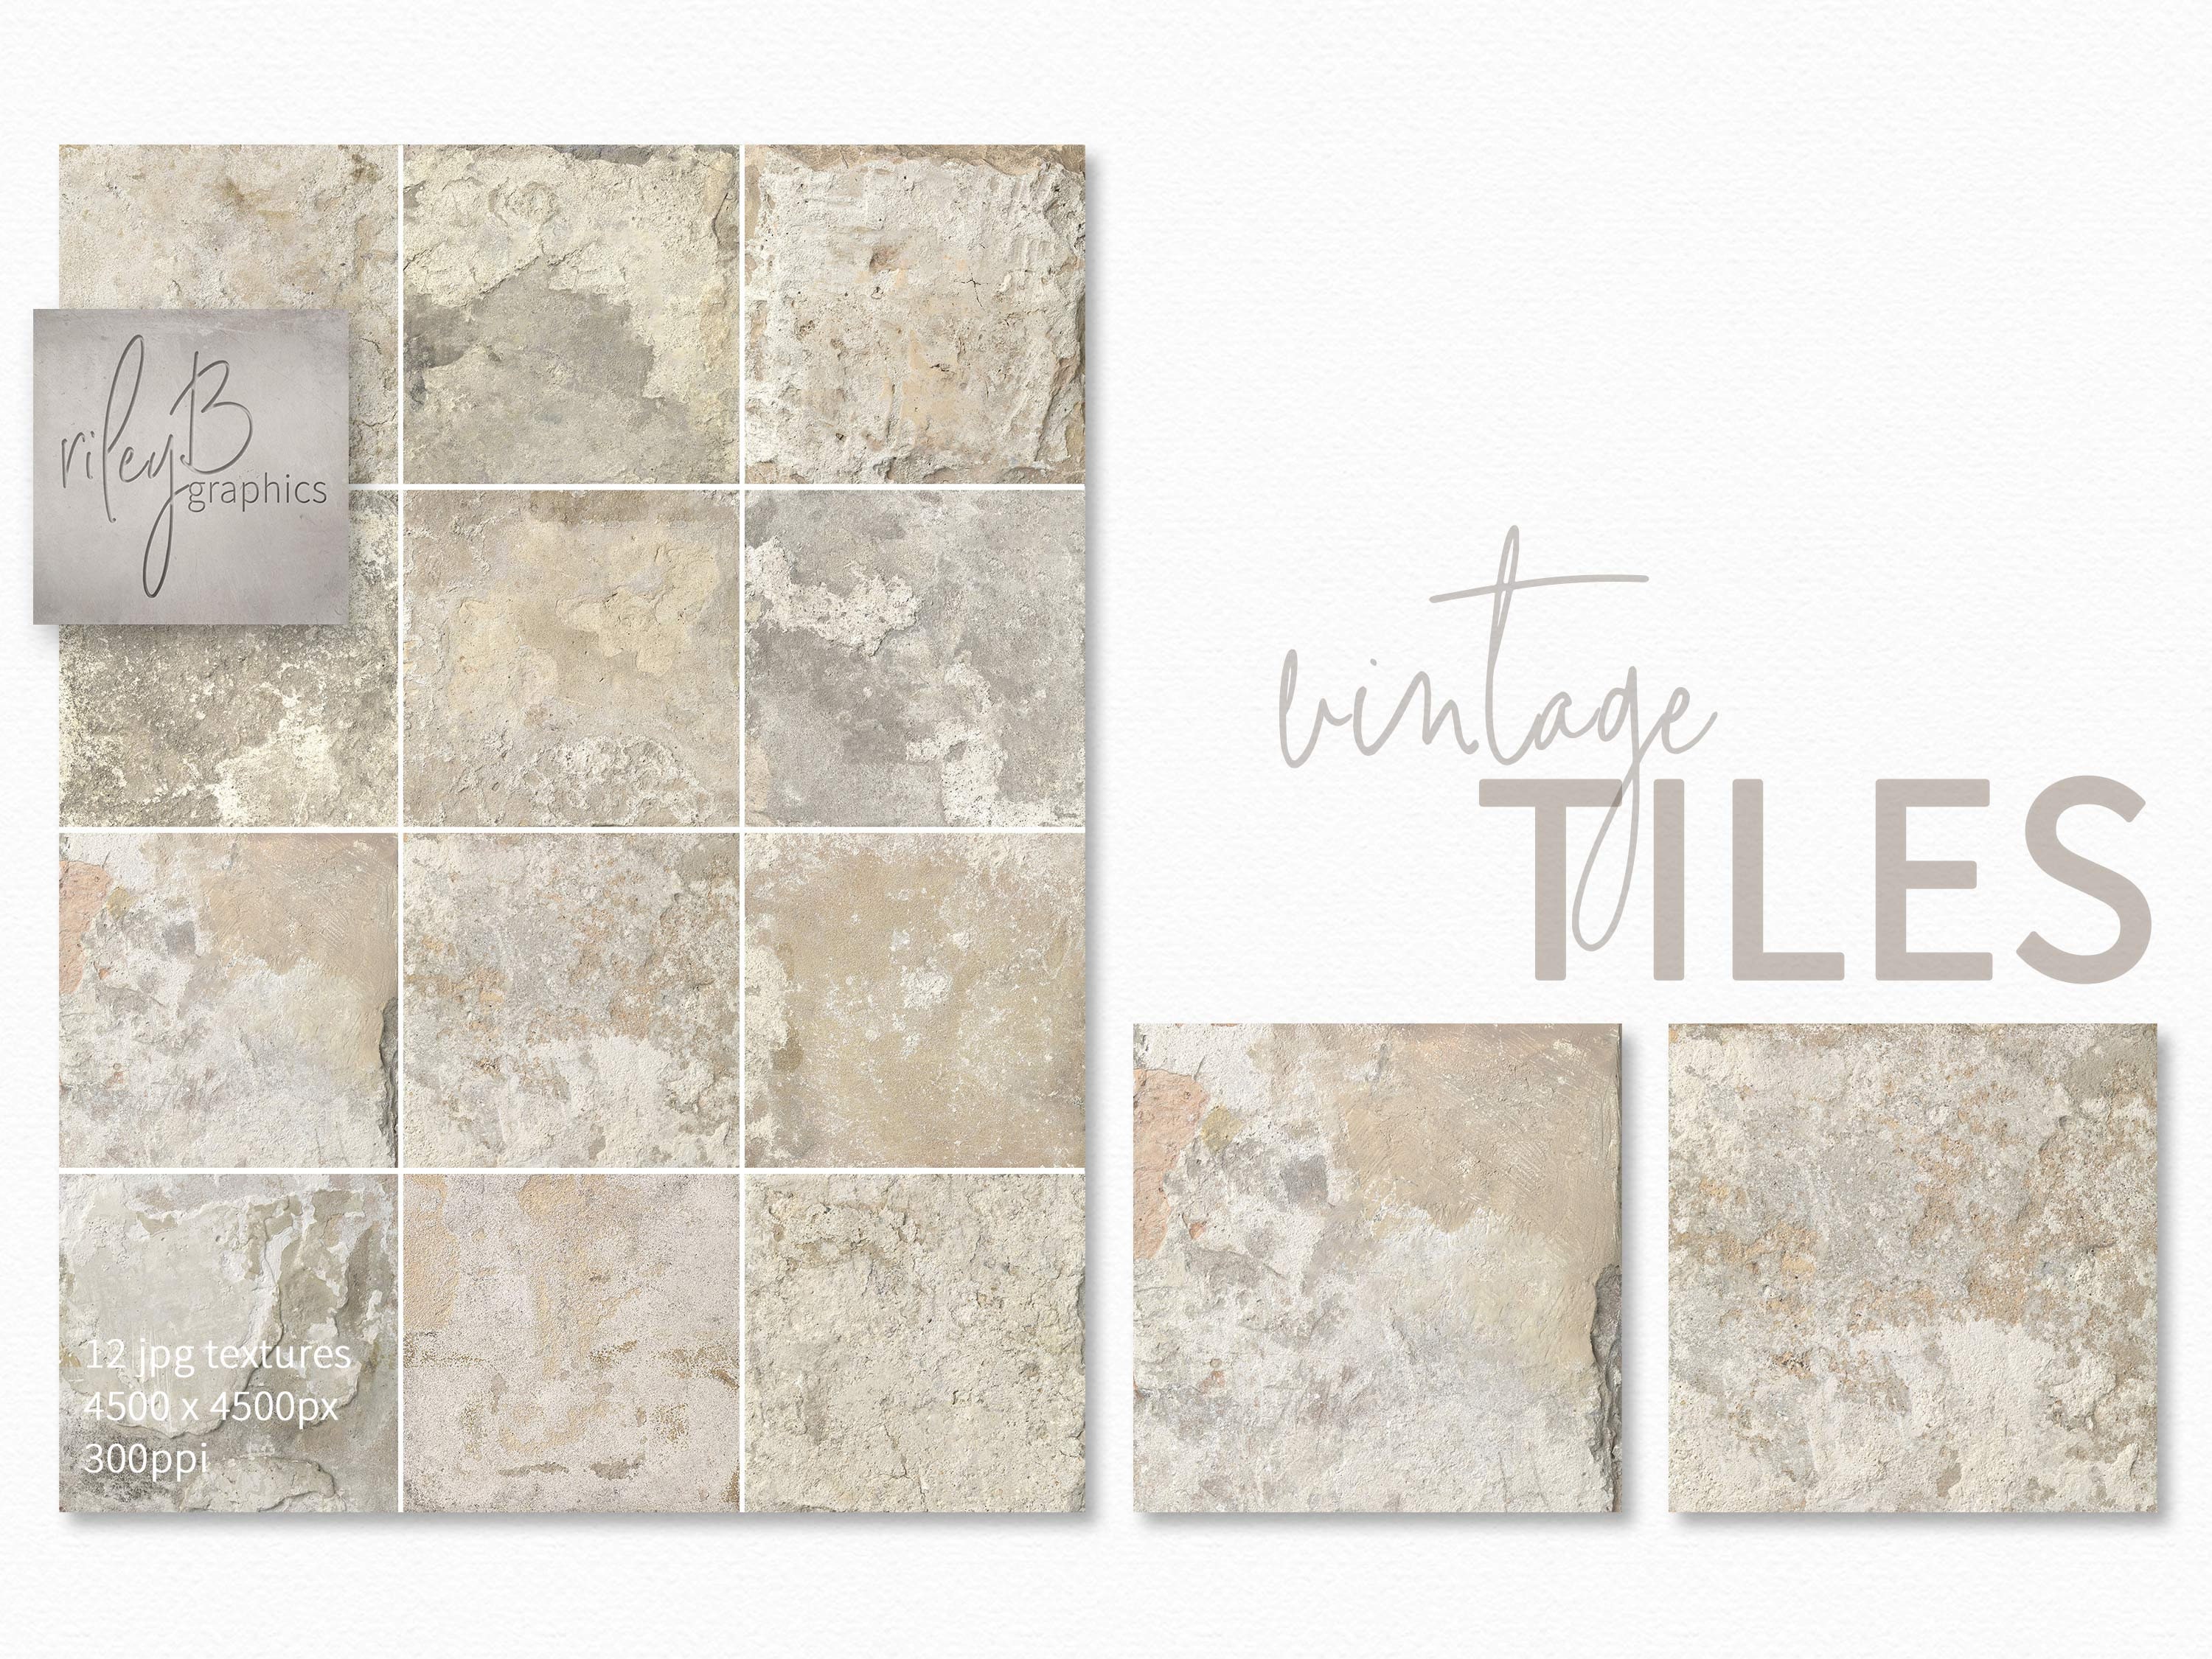 Mixtiles: 16 Tiles for $109 Shipped